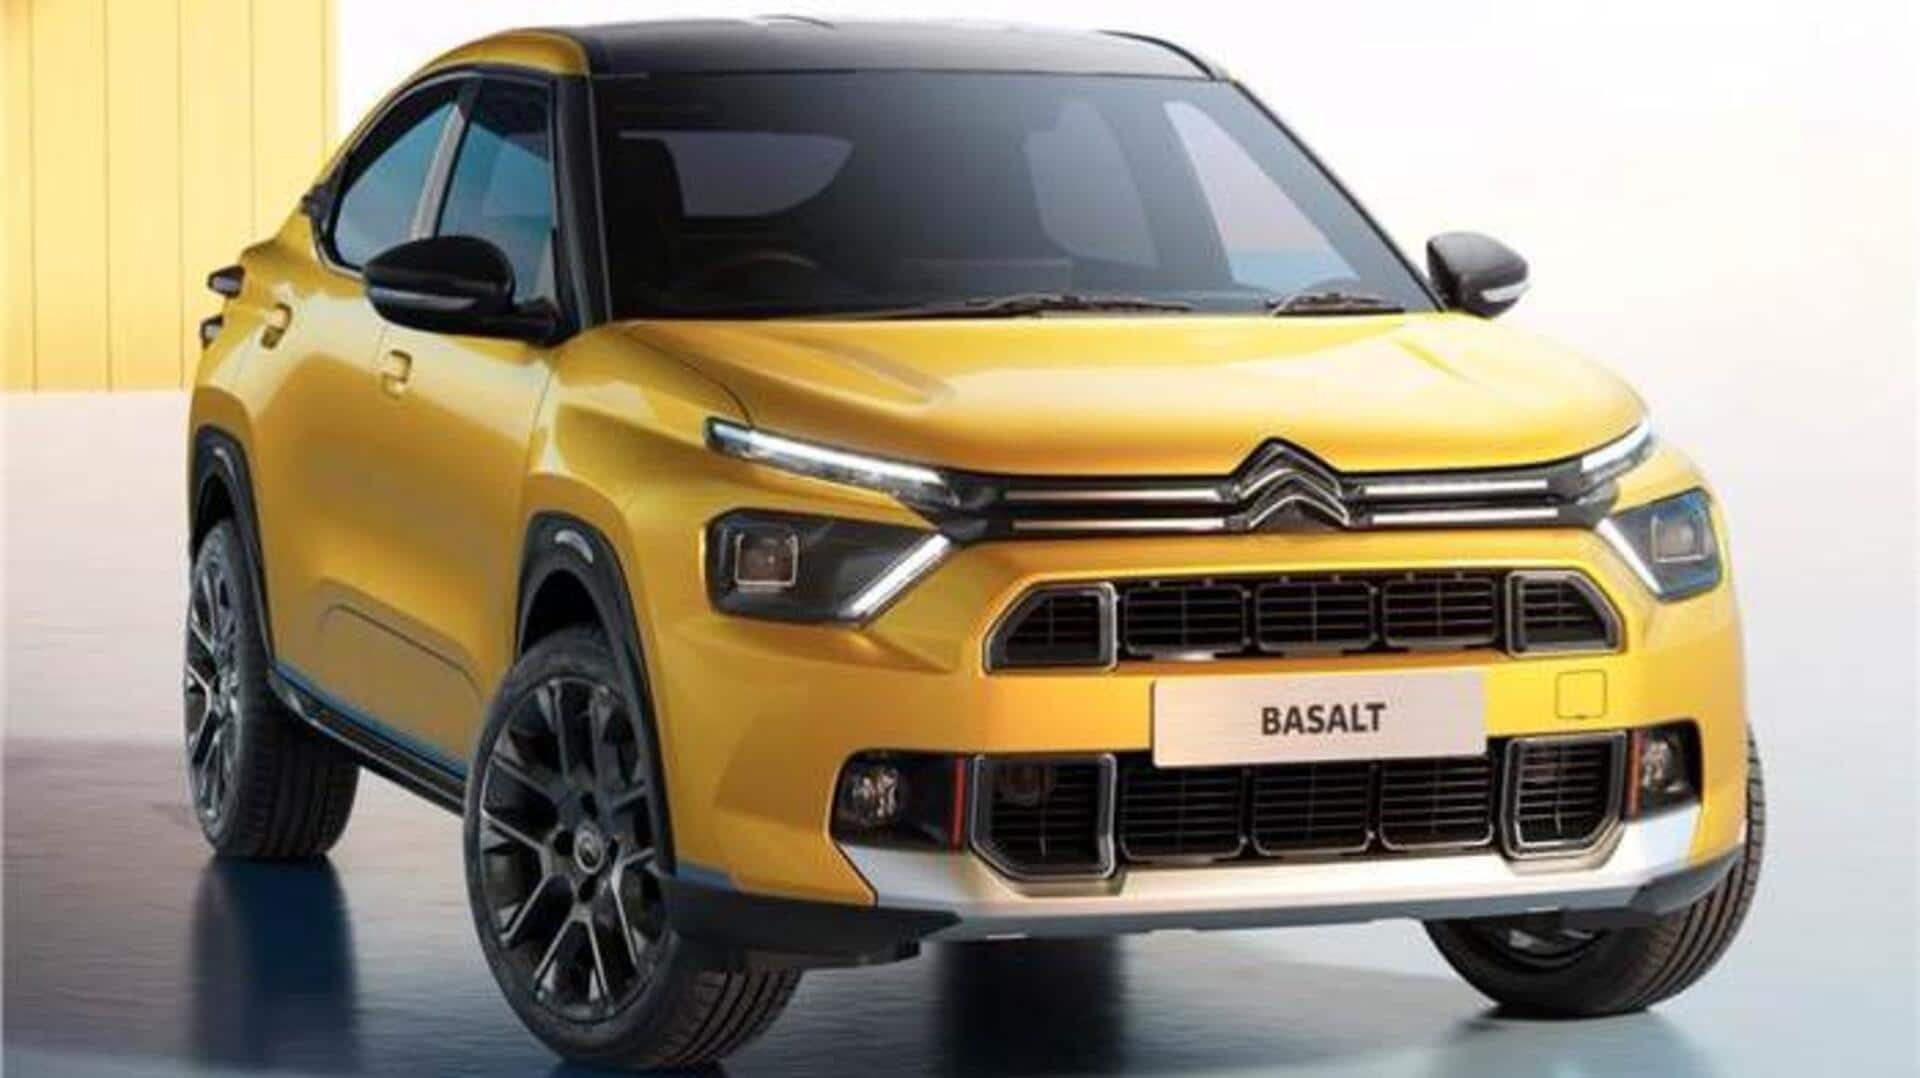 Citroen's all-new Basalt coupe-SUV breaks cover worldwide: Check features